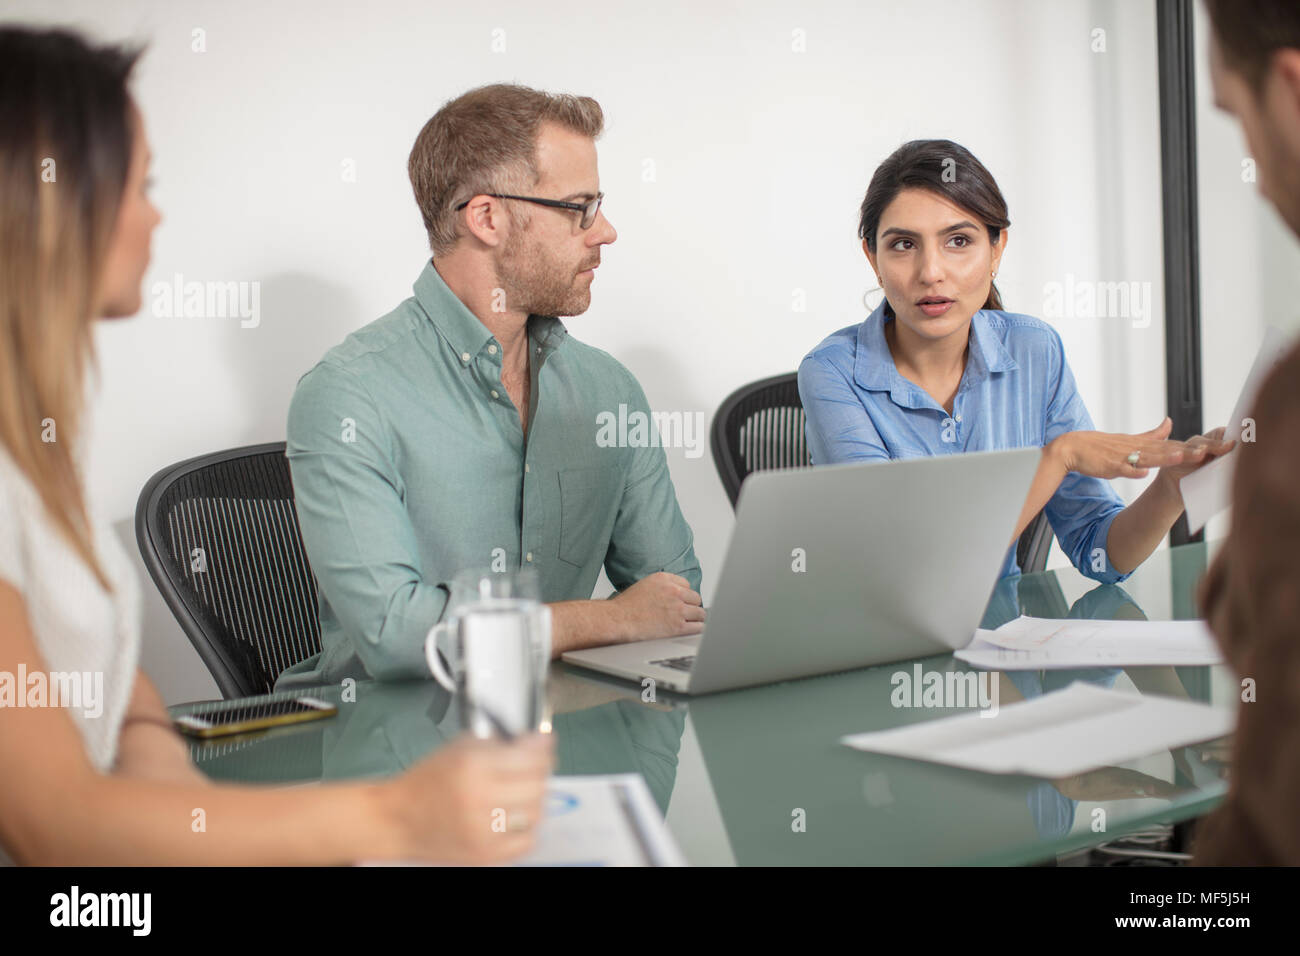 Colleagues having a meeting in office boardroom Stock Photo